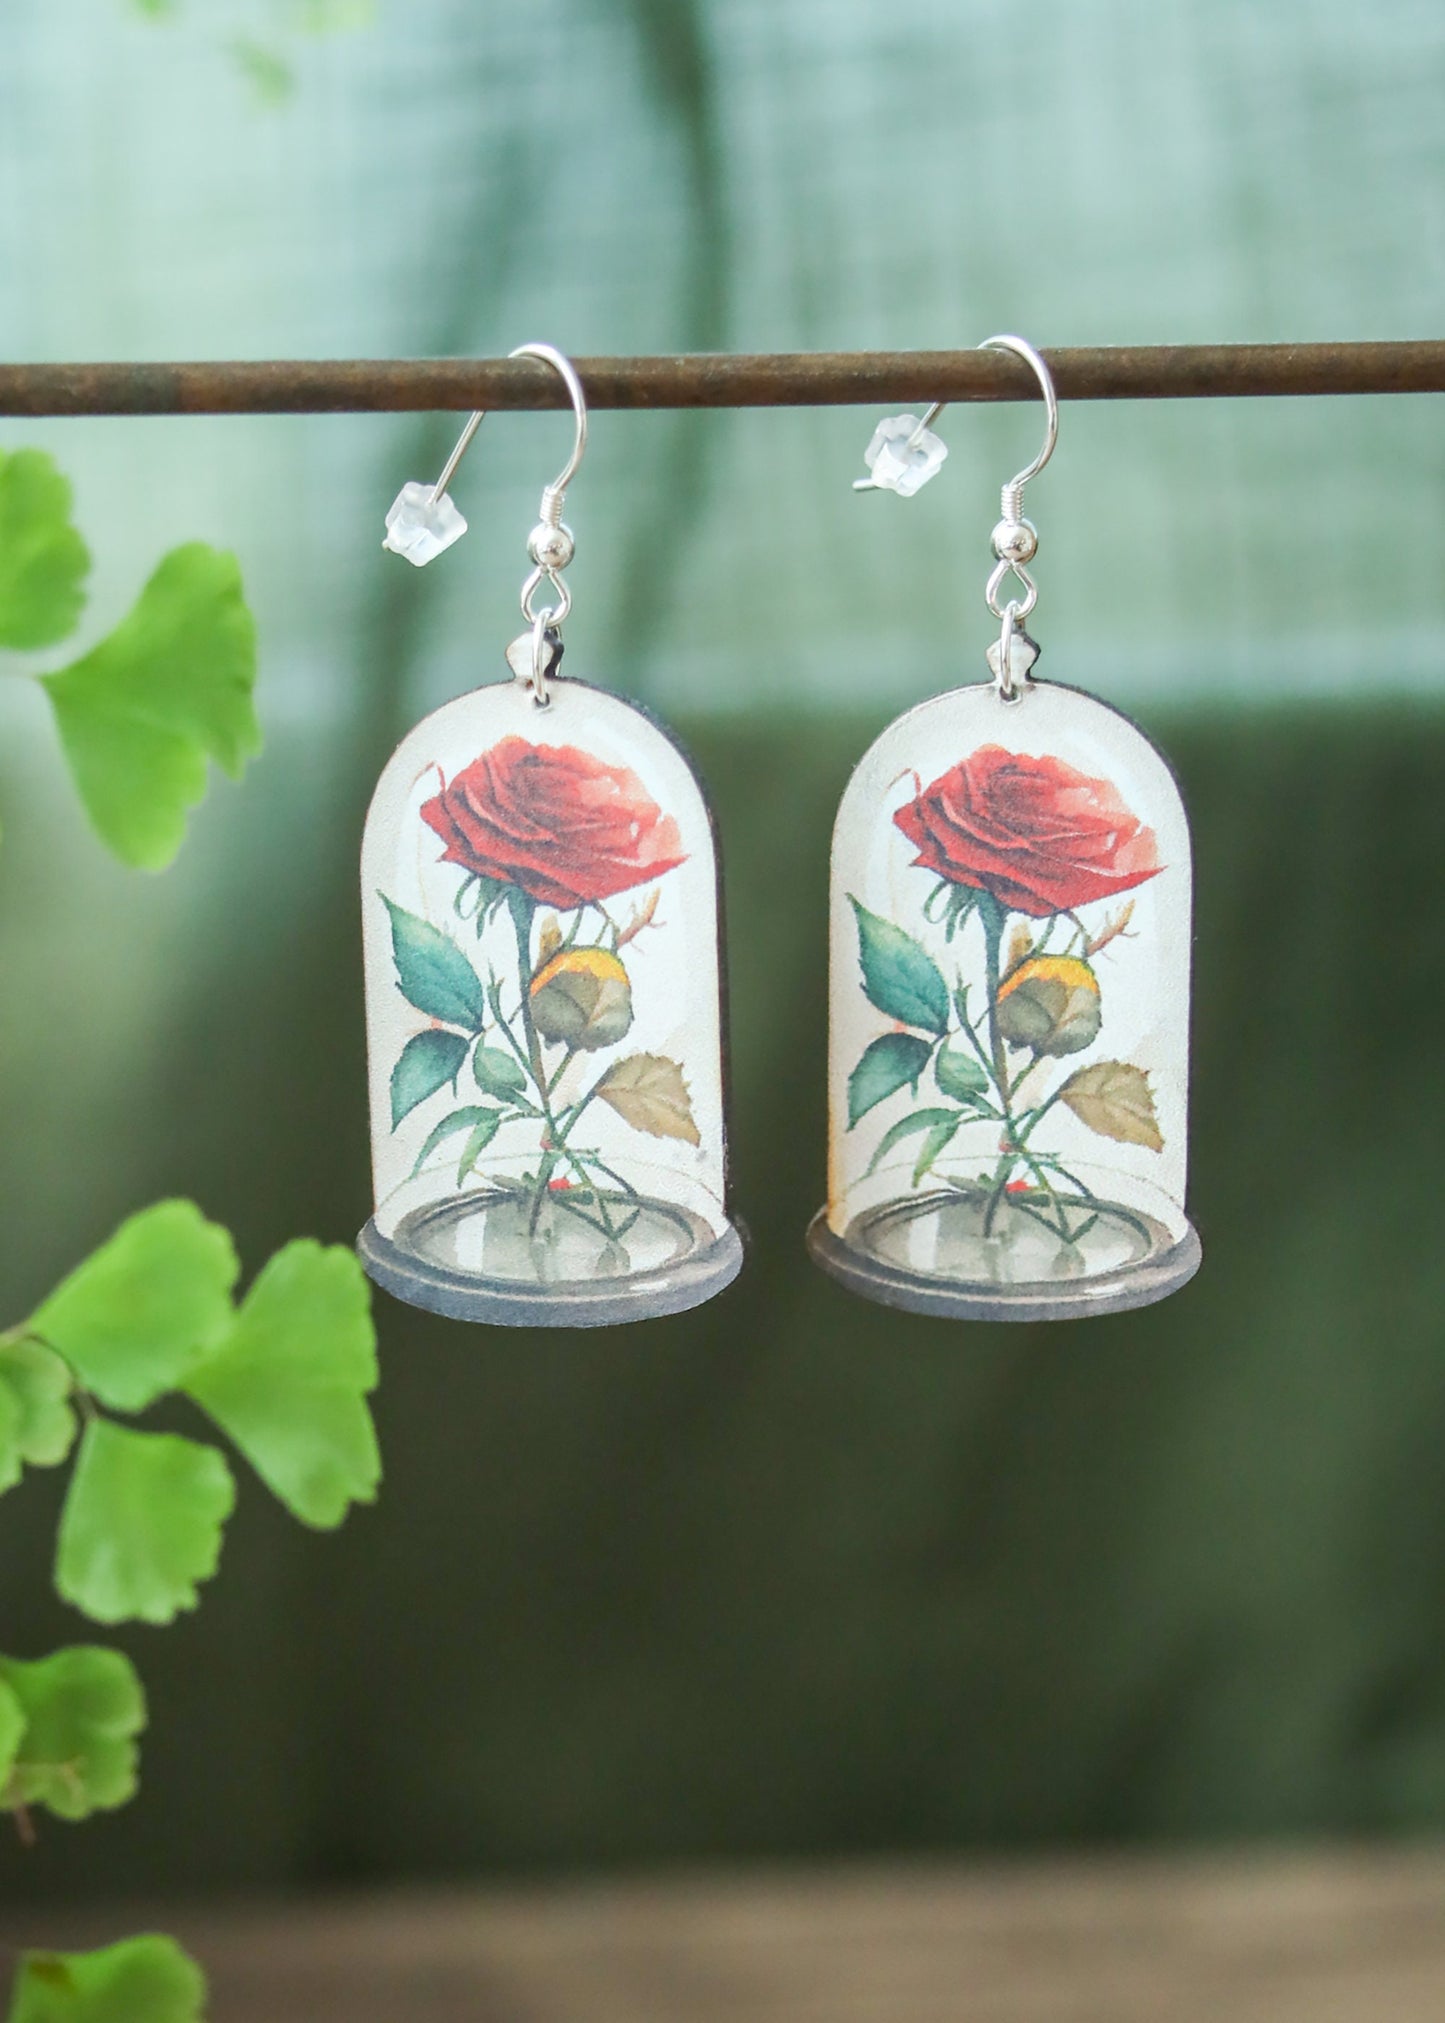 Glass Rose Earrings | Fairytale Story Book Fantasy Jewelry | Whimsical Fantasy Floral Jar Dangles | Laser Cut Wood Boho Fairycore Charms